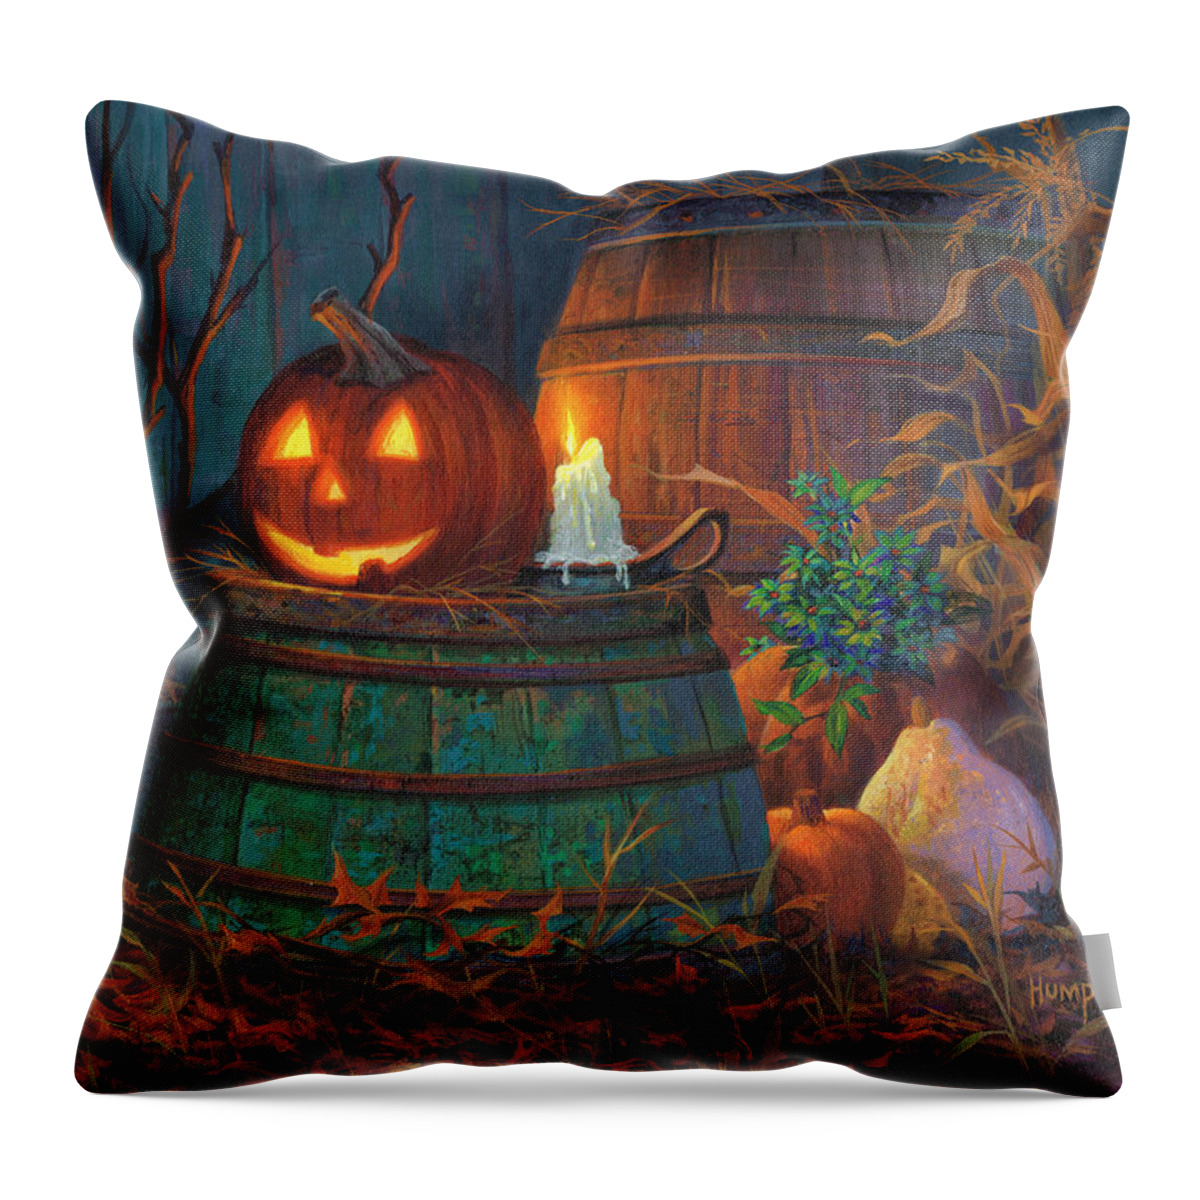 Michael Humphries Throw Pillow featuring the painting The Great Pumpkin by Michael Humphries